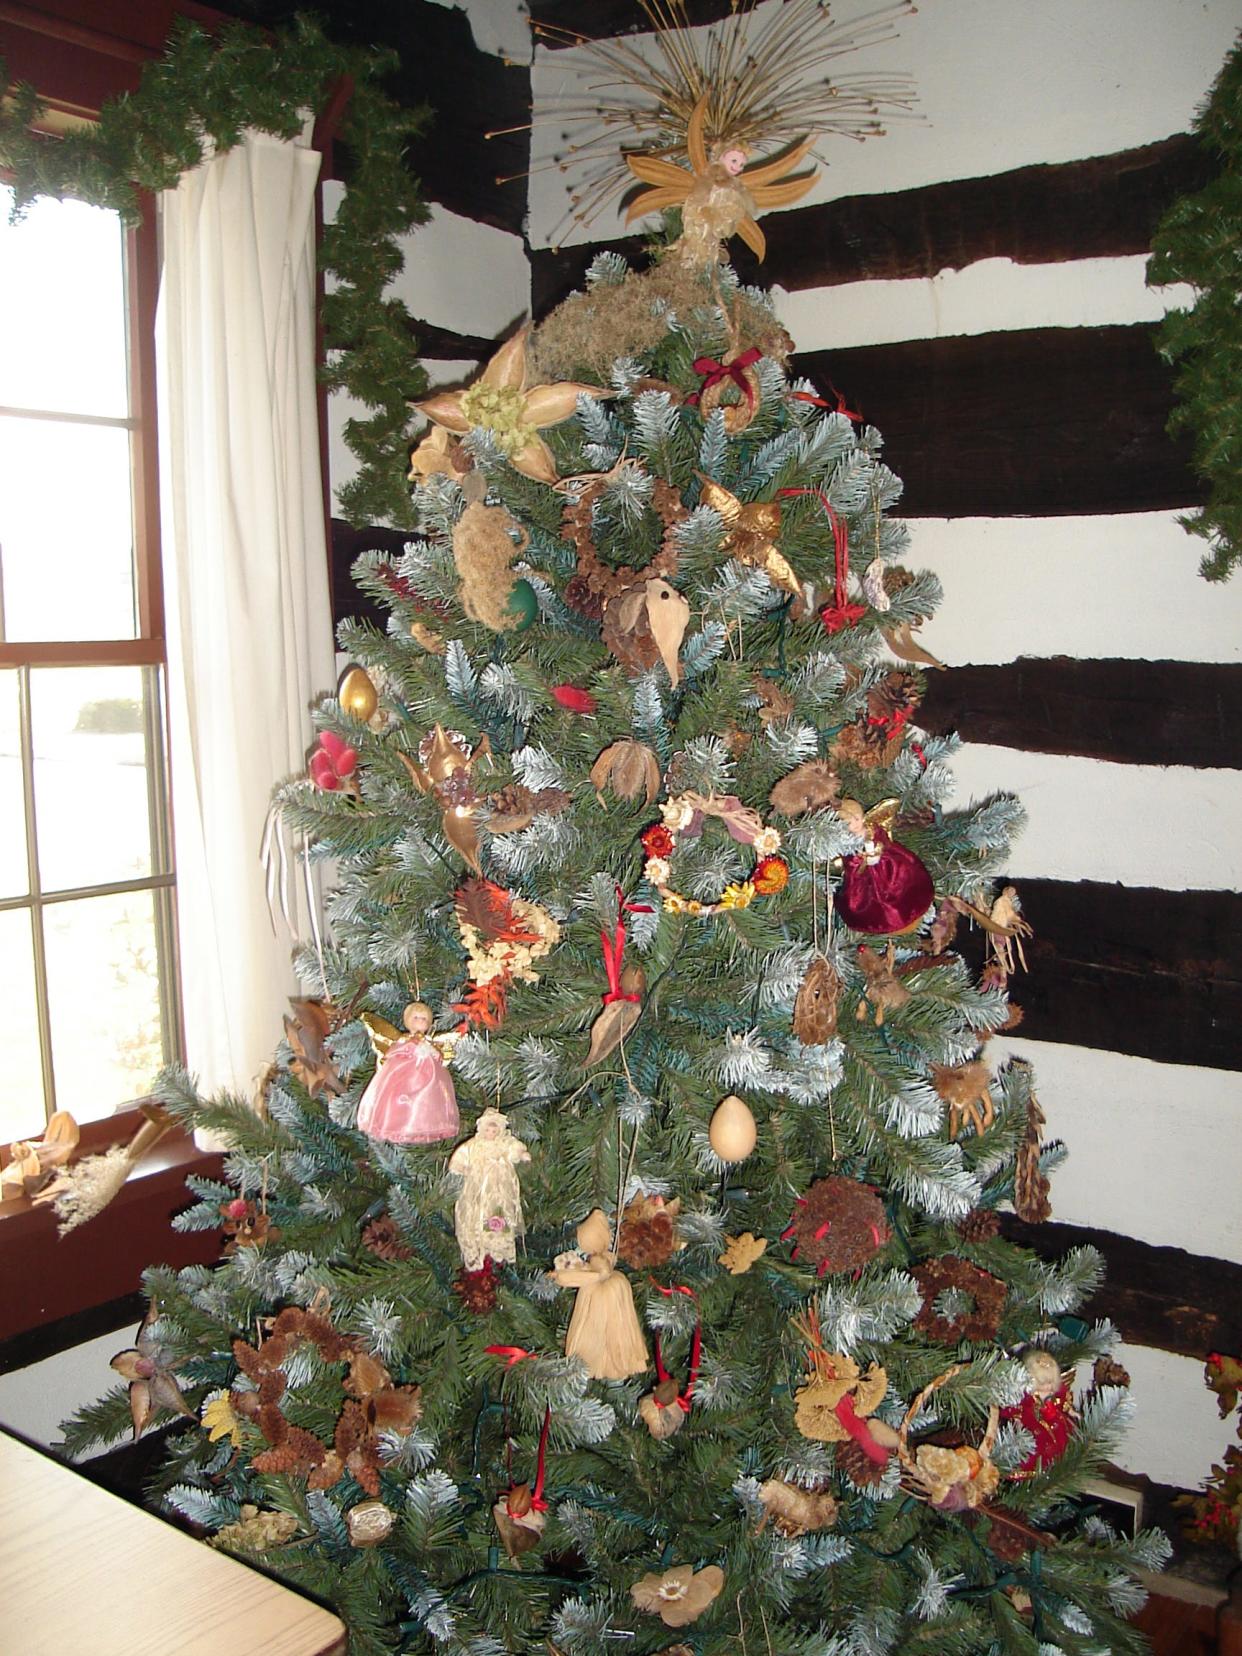 A decorated Christmas tree at the log house at Dover Community Park decorated by the Conewago Garden Club using natural ornaments in 2008.